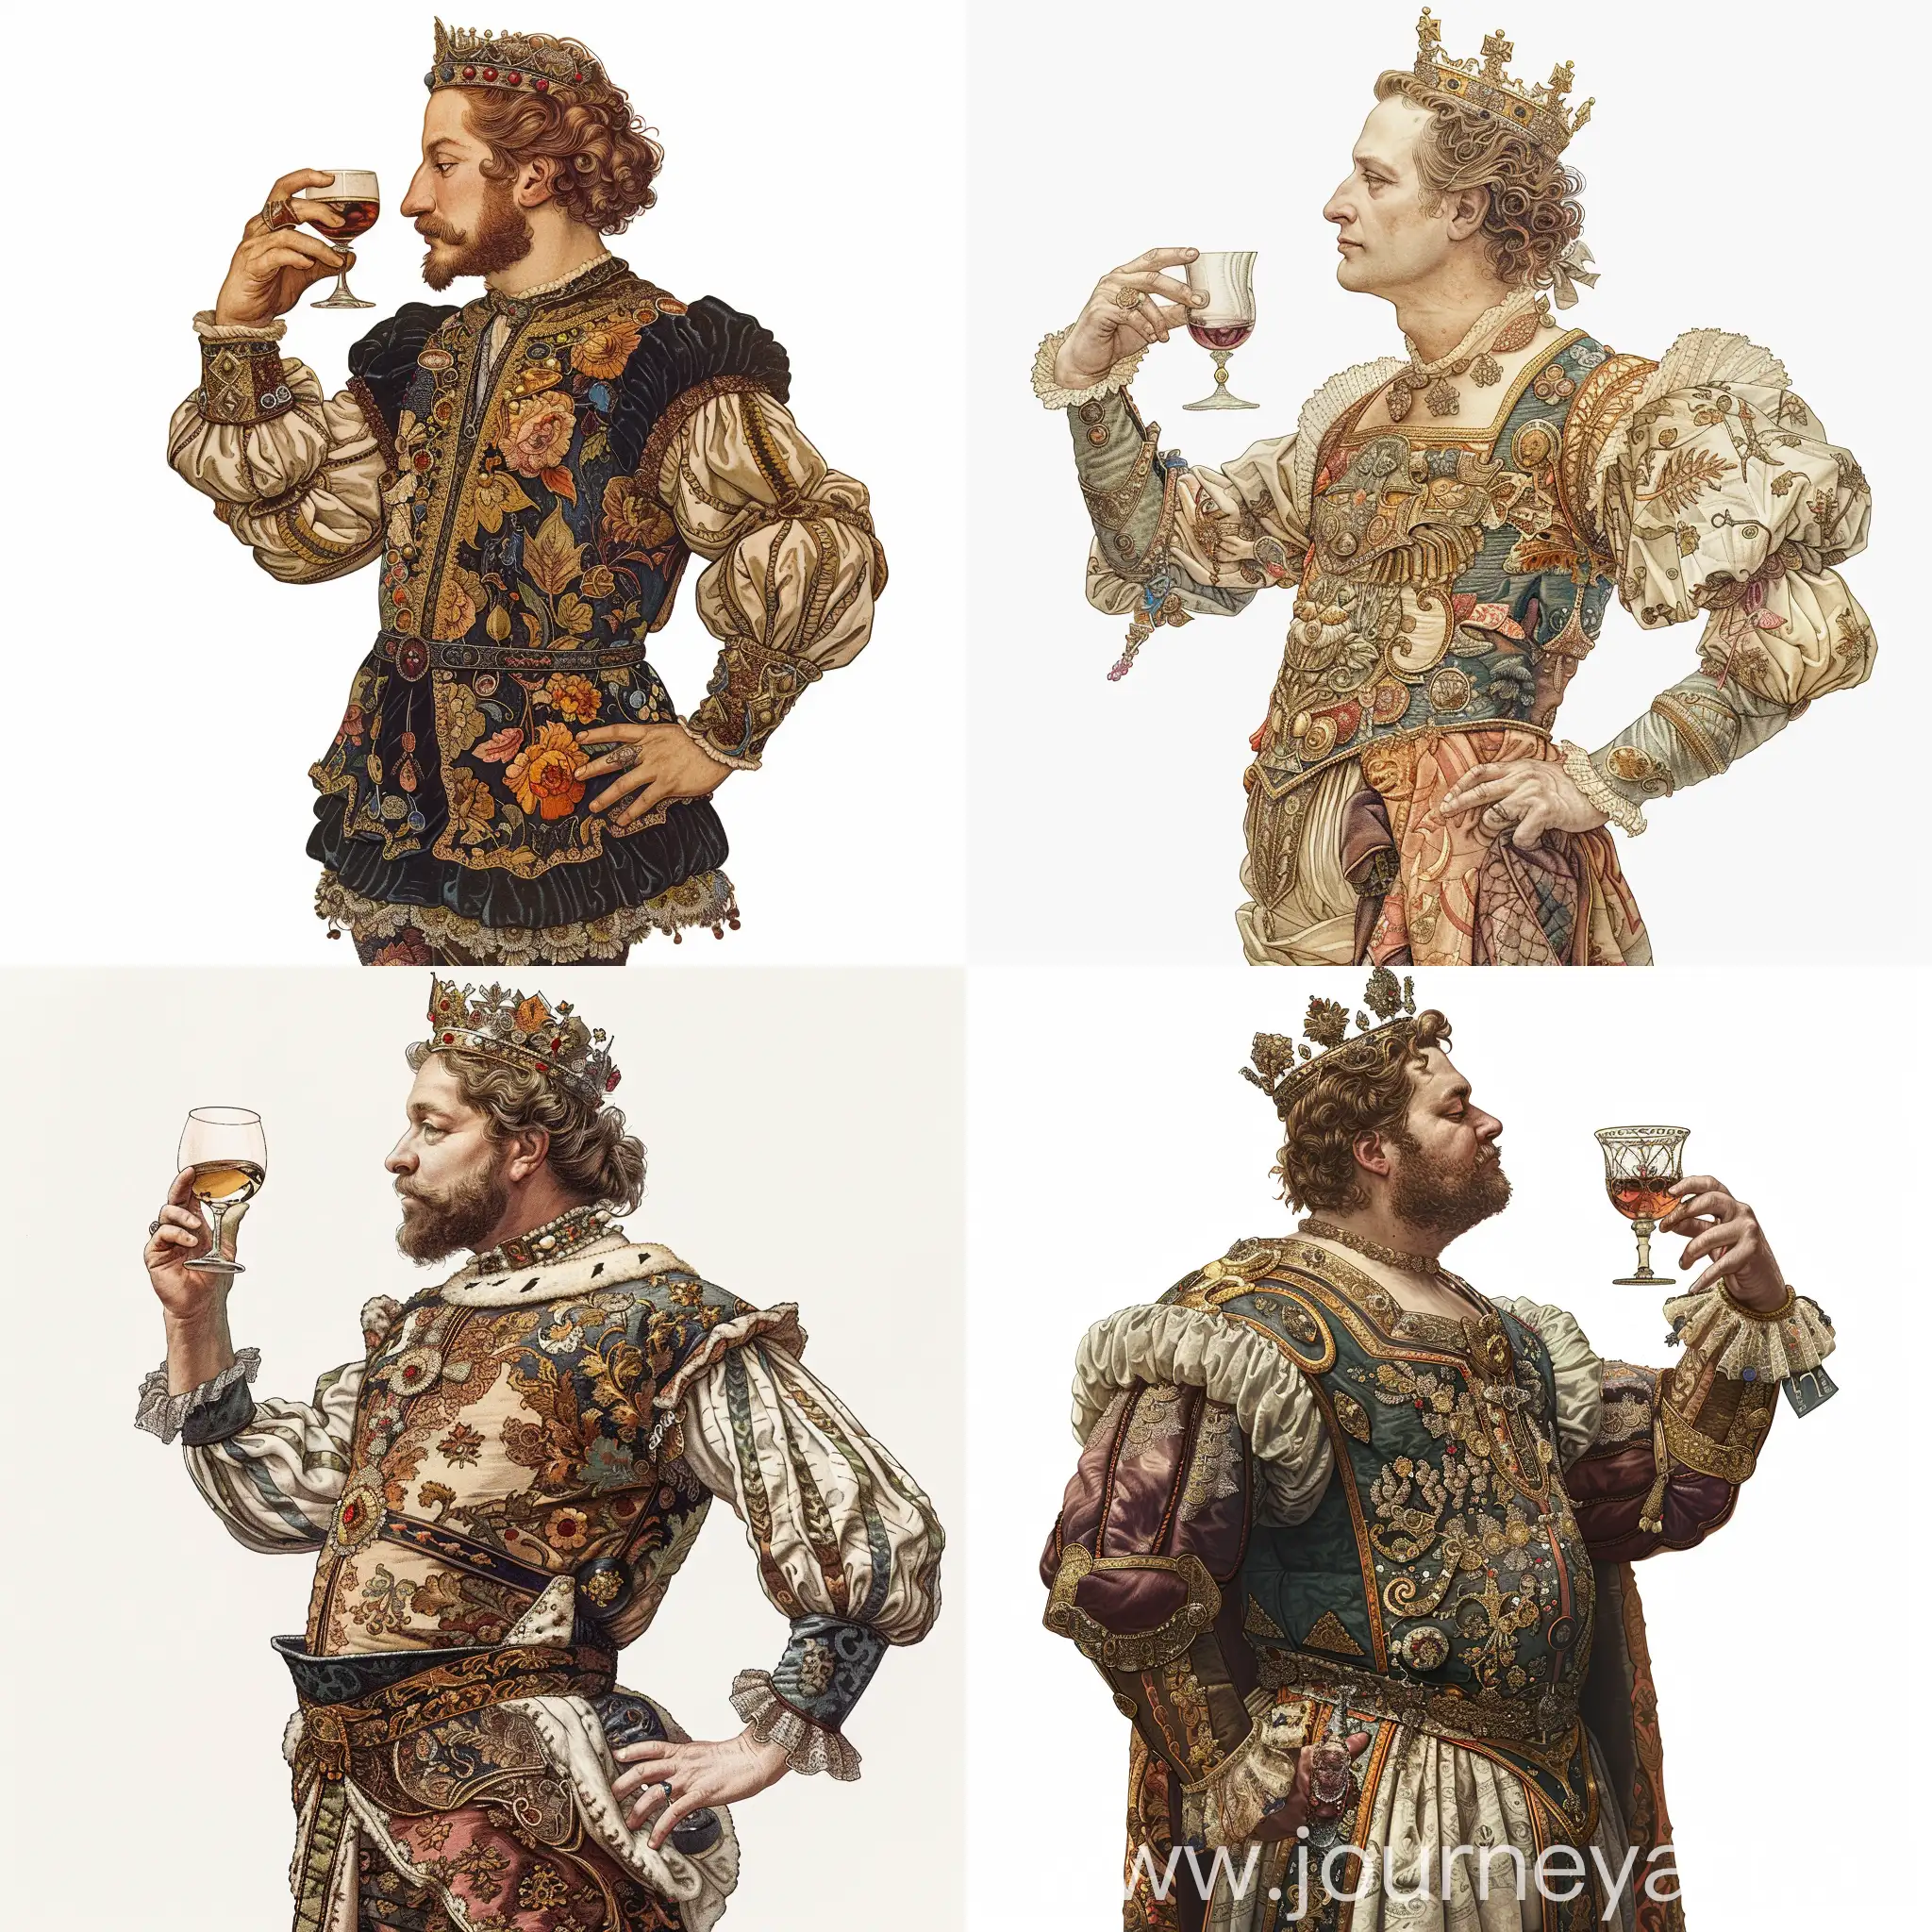 Ancient-French-King-with-Wine-Regal-Portrait-in-Exquisite-Attire